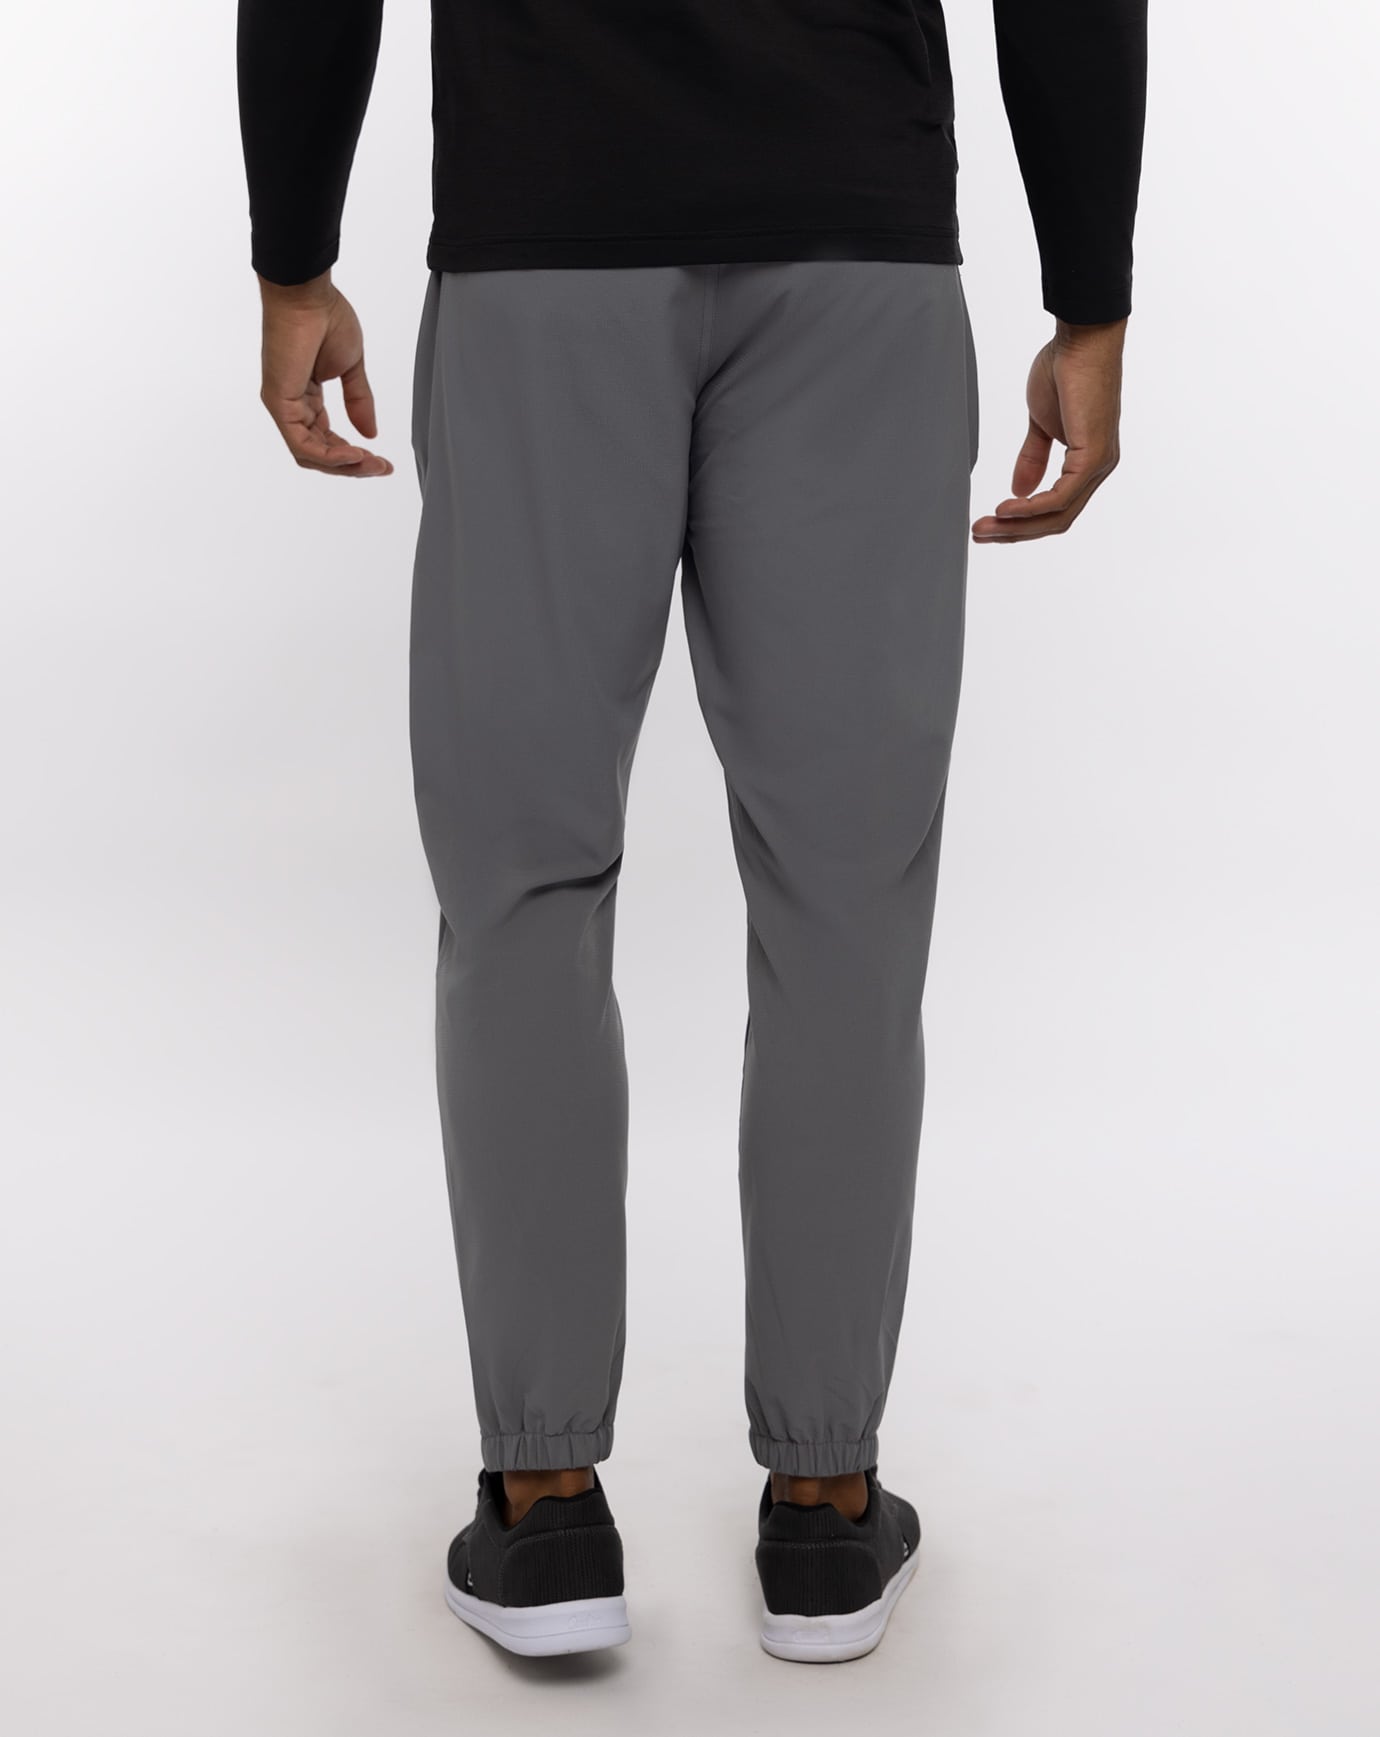 Ready to fleece joggers in graphite grey, size 8. I'm so glad I